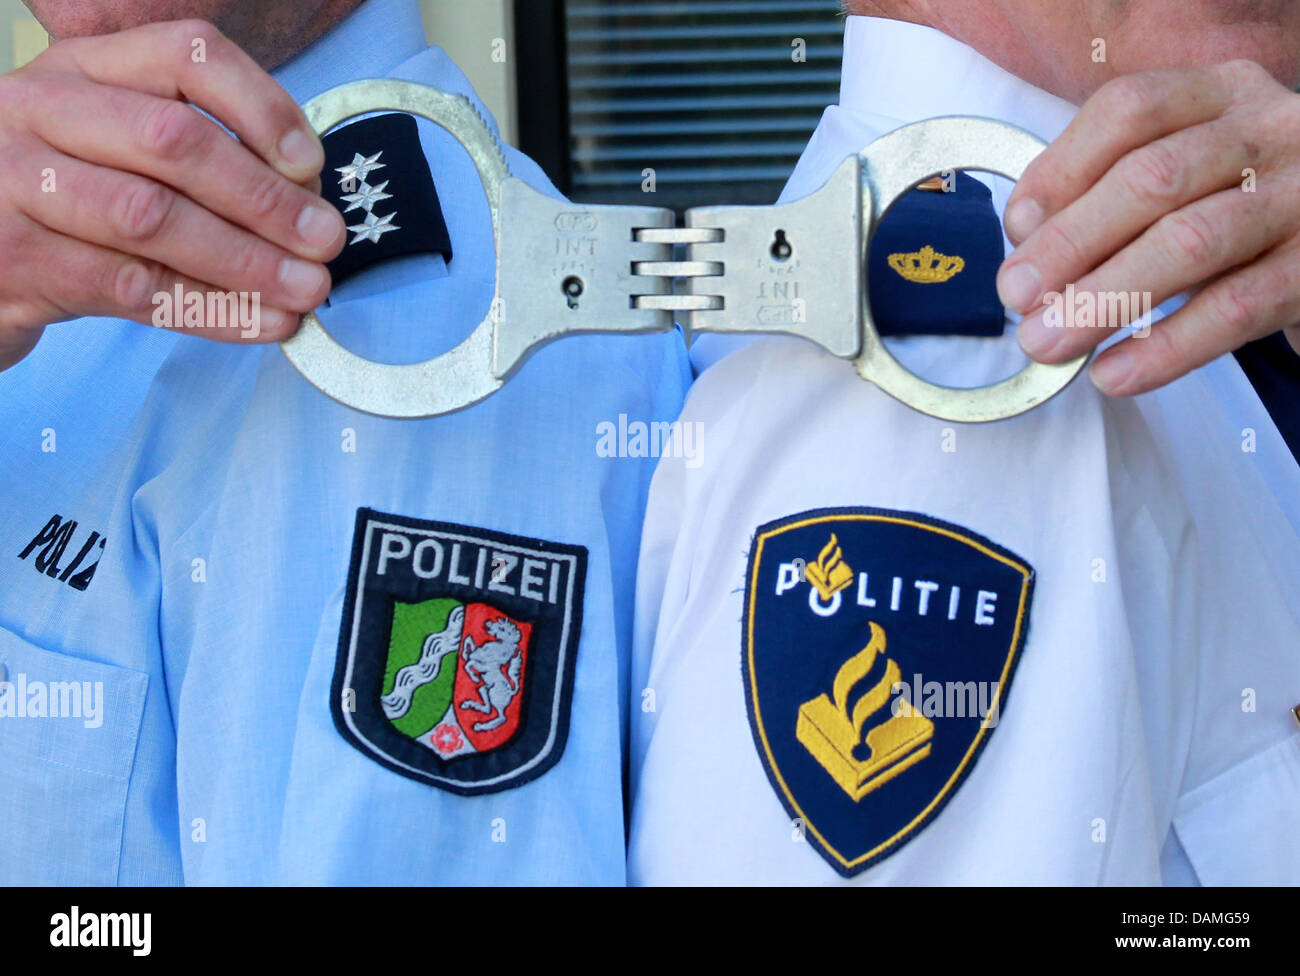 German And Dutch Police Pose Witch Handcuffs In Moenchengladbach Germany 25 May 2011 District